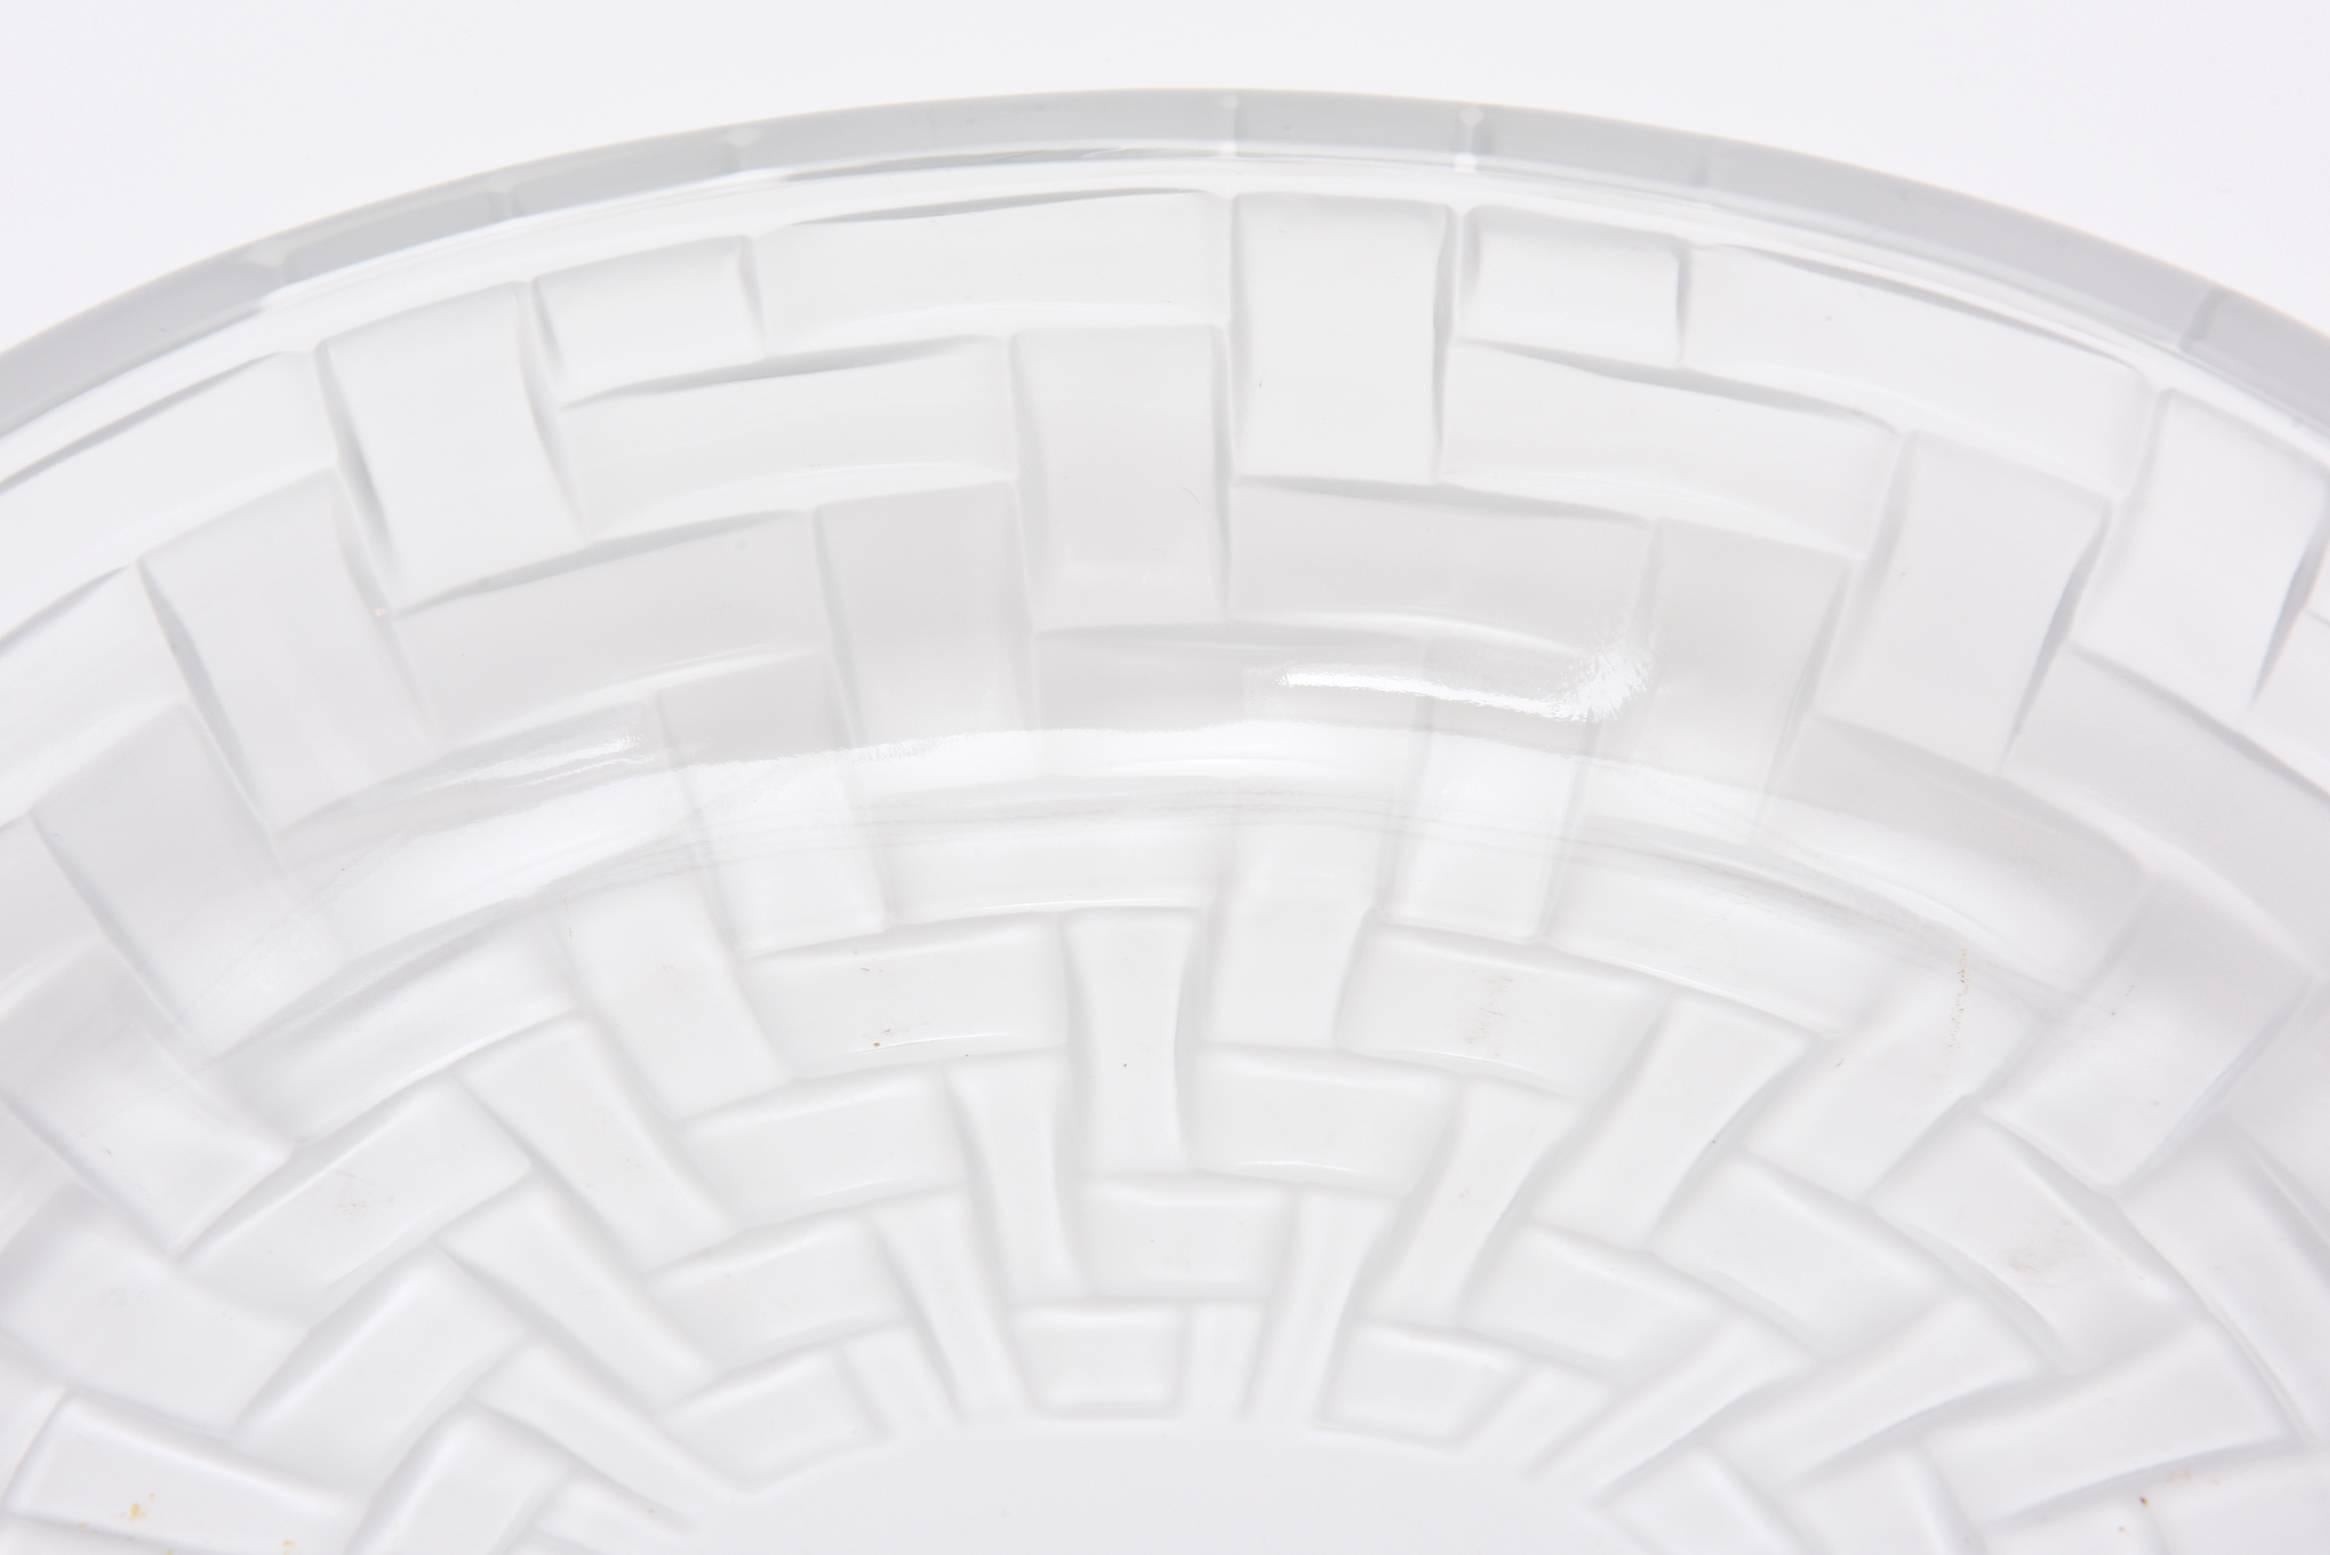 This oval signed Lalique crystal centerpiece or serving bowl is magnificent. It's abstract modernist design and handblown work is timeless. and a forever piece. This is a difficult Lalique pattern to come by now and not seen around.
It is from the